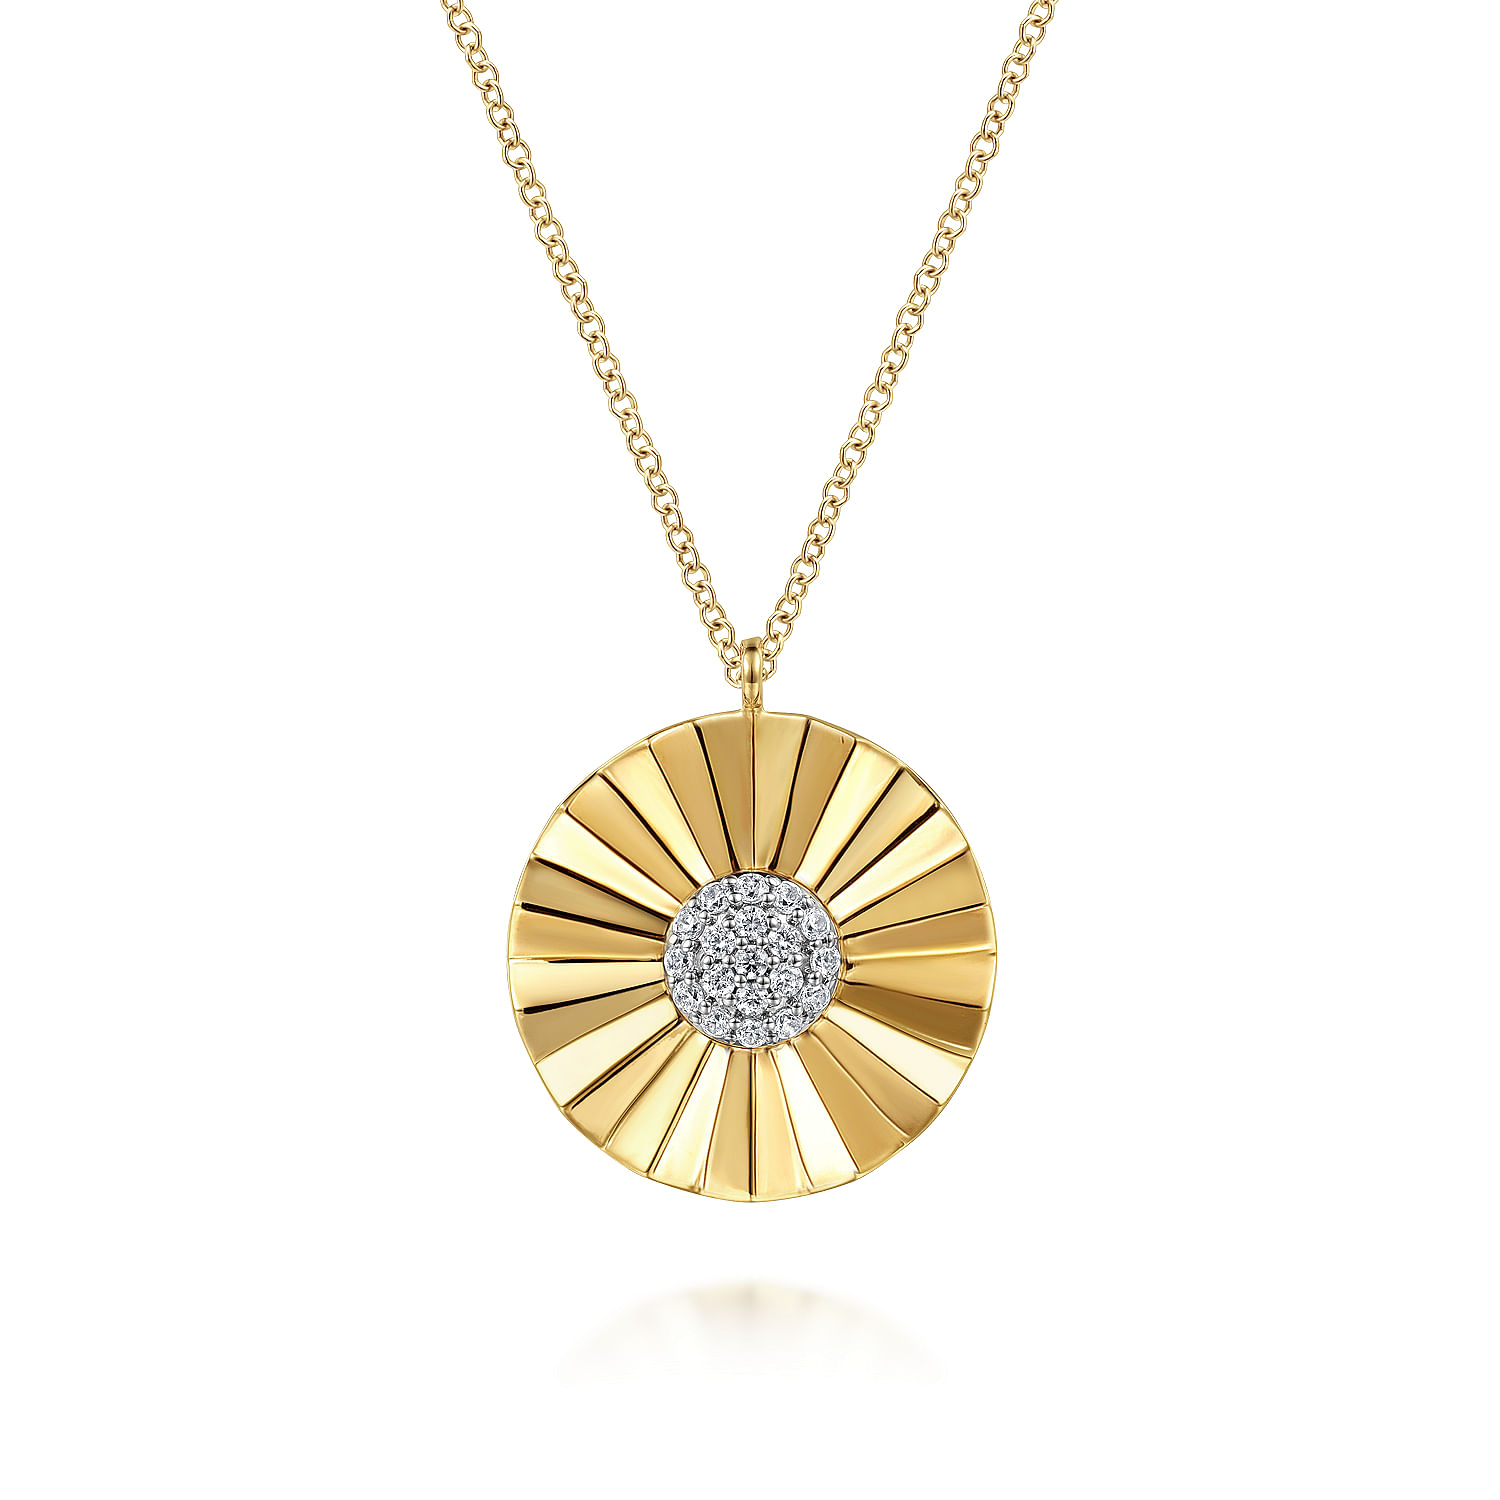 14K White and Yellow Gold Diamond Round Shape Necklace with Diamond Cut Texture